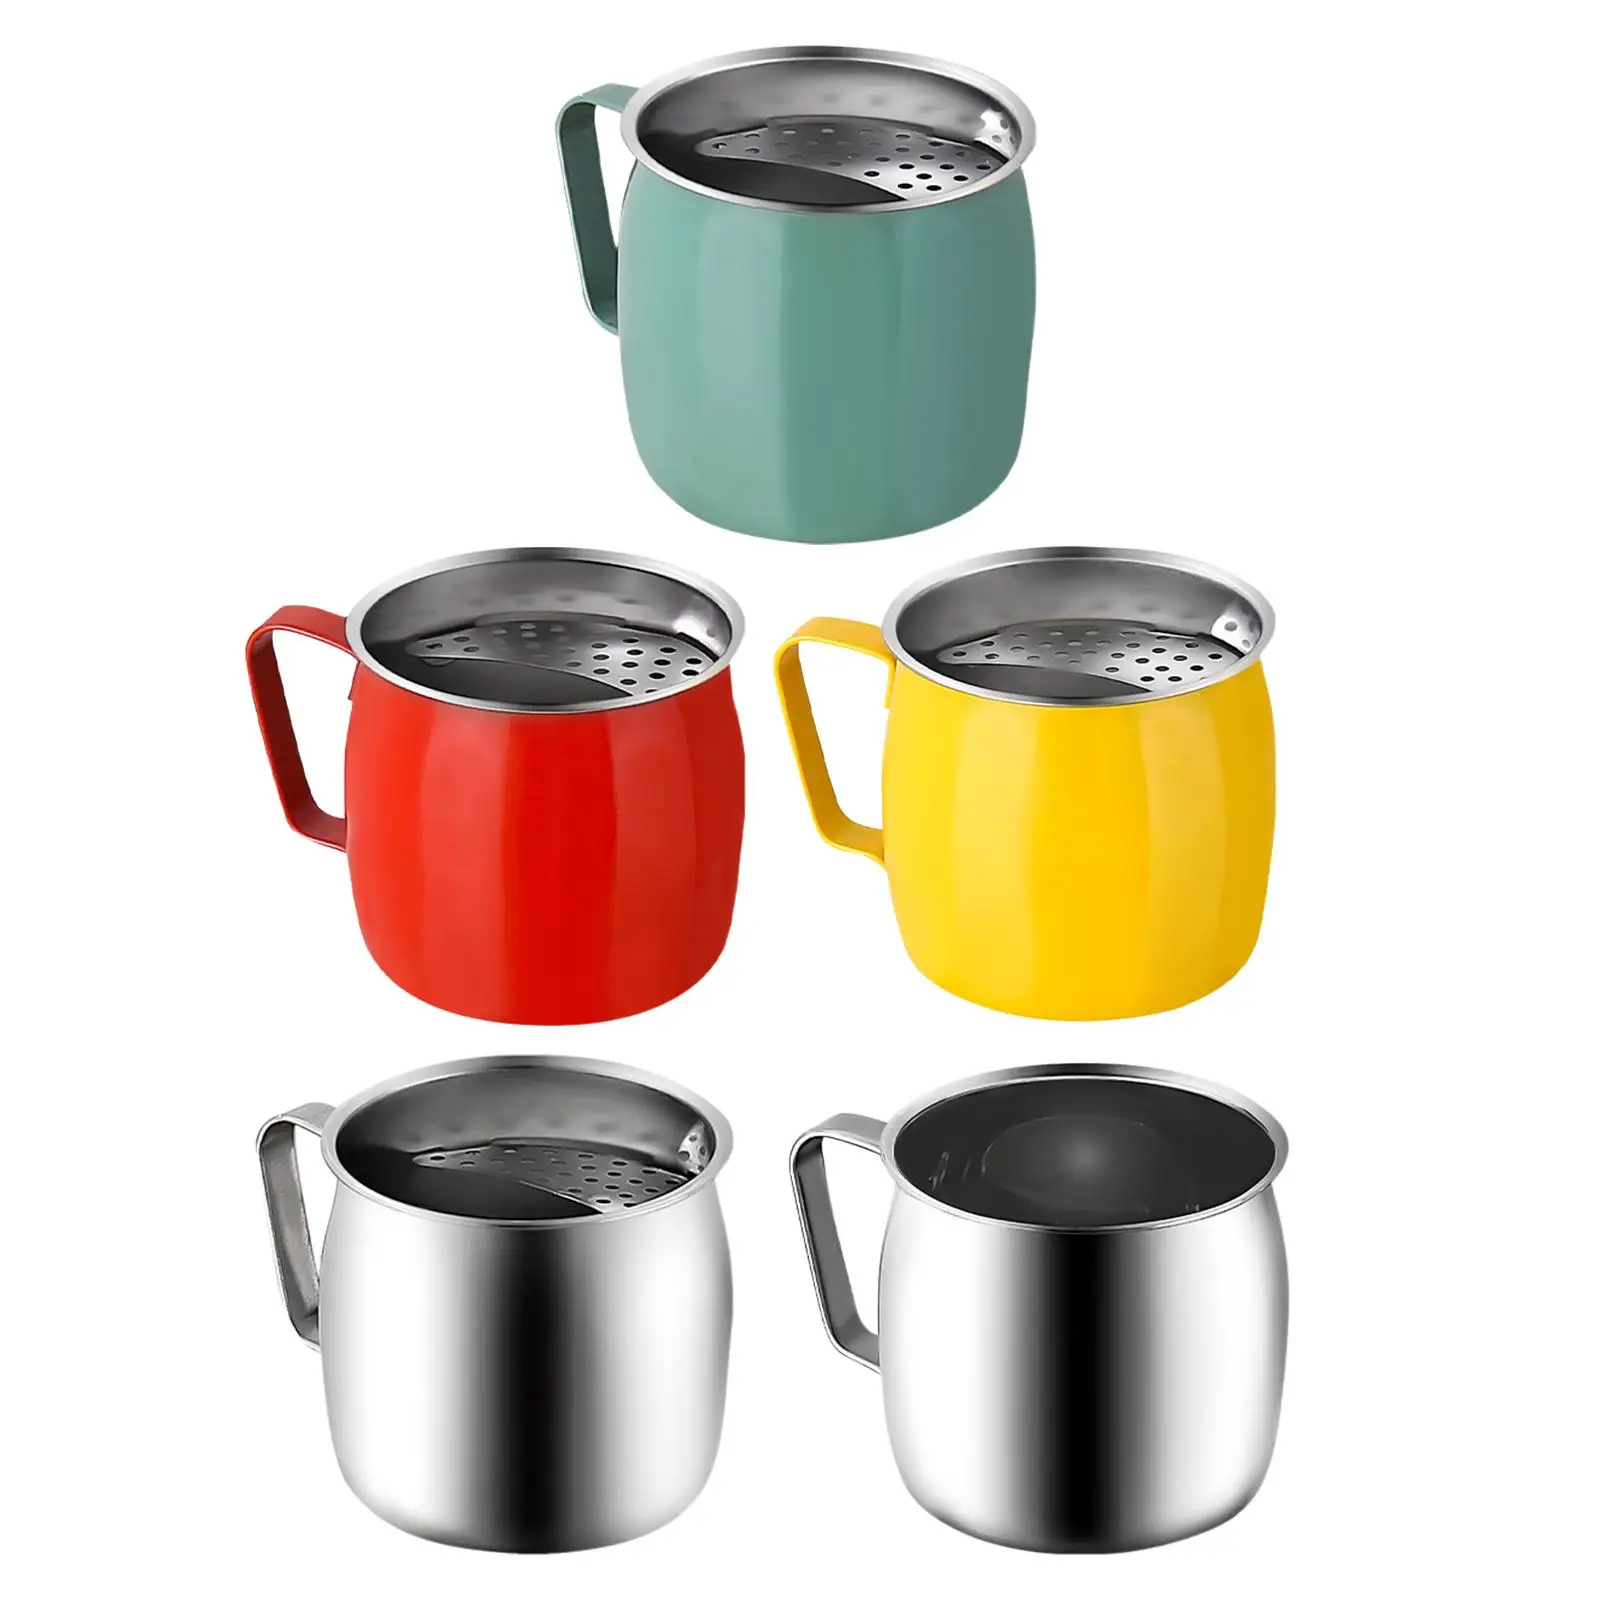 Stainless Steel Tea Cup Multipurpose Portable Reusable Sturdy with Filter Durable Creative Drinking Cup for Home Office Party